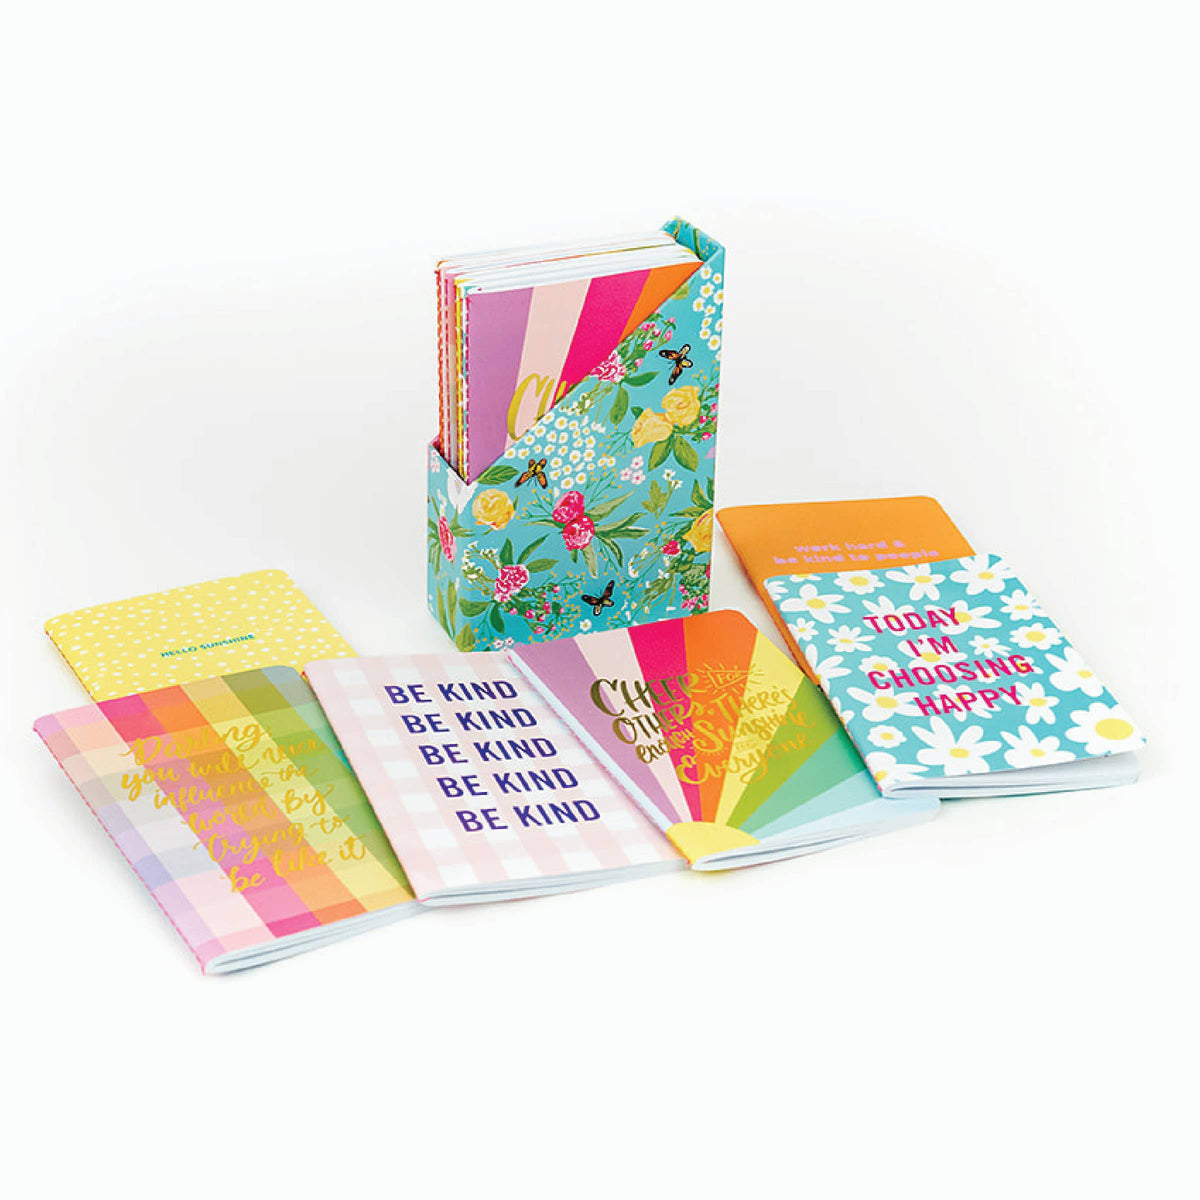 Kindness Mini Notebooks with Holder - The Preppy Bunny